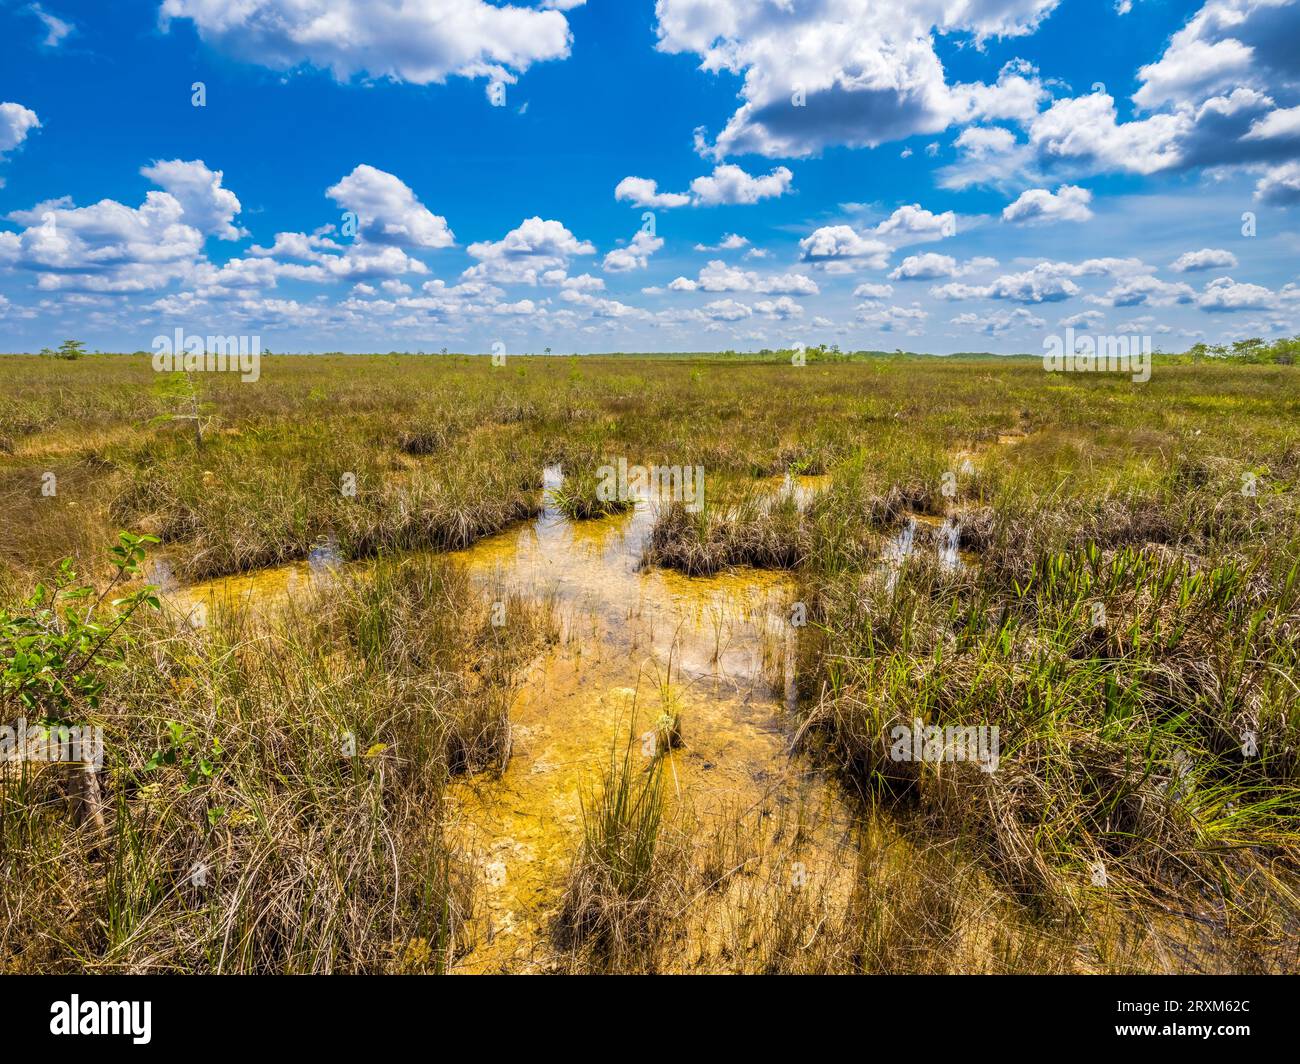 Clouds over sawgrass in Everglades National Park, Florida, USA Stock Photo